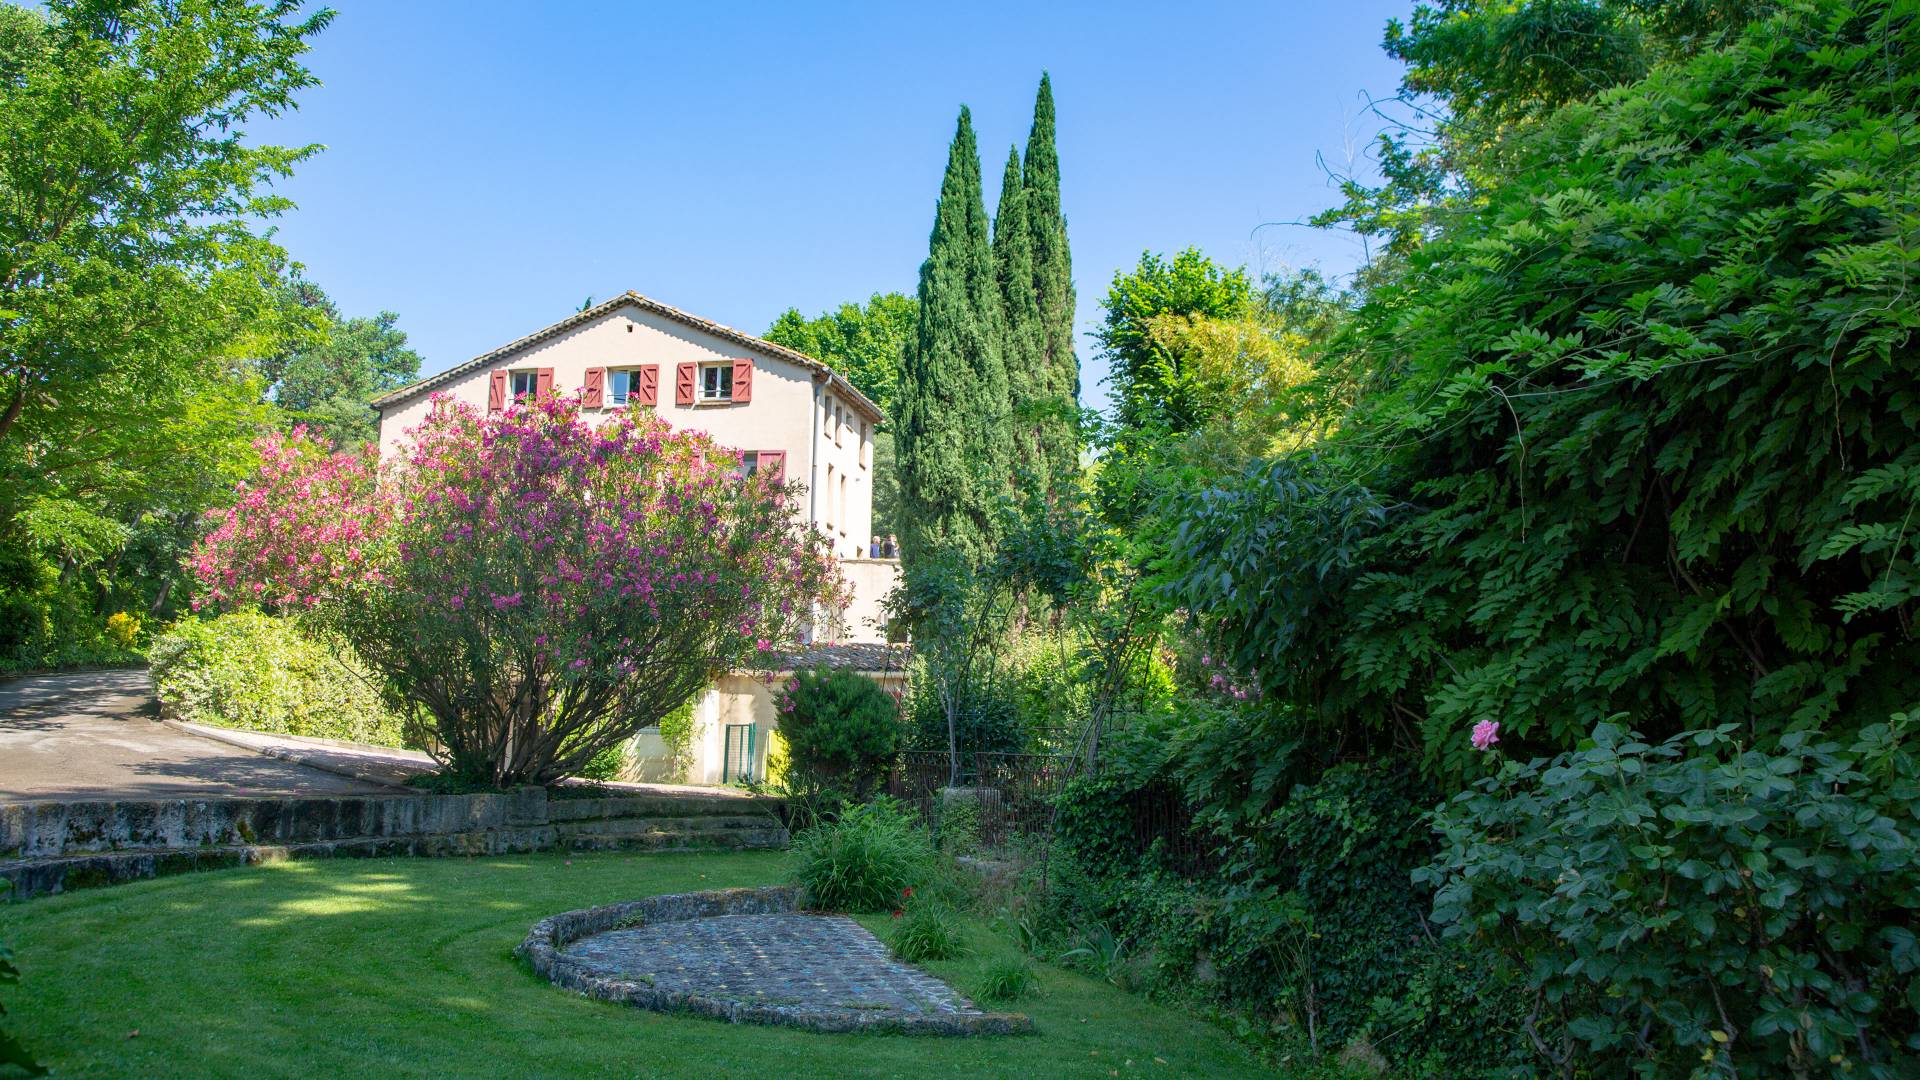 Grounds and house at Aix-en-Provence language institute in France